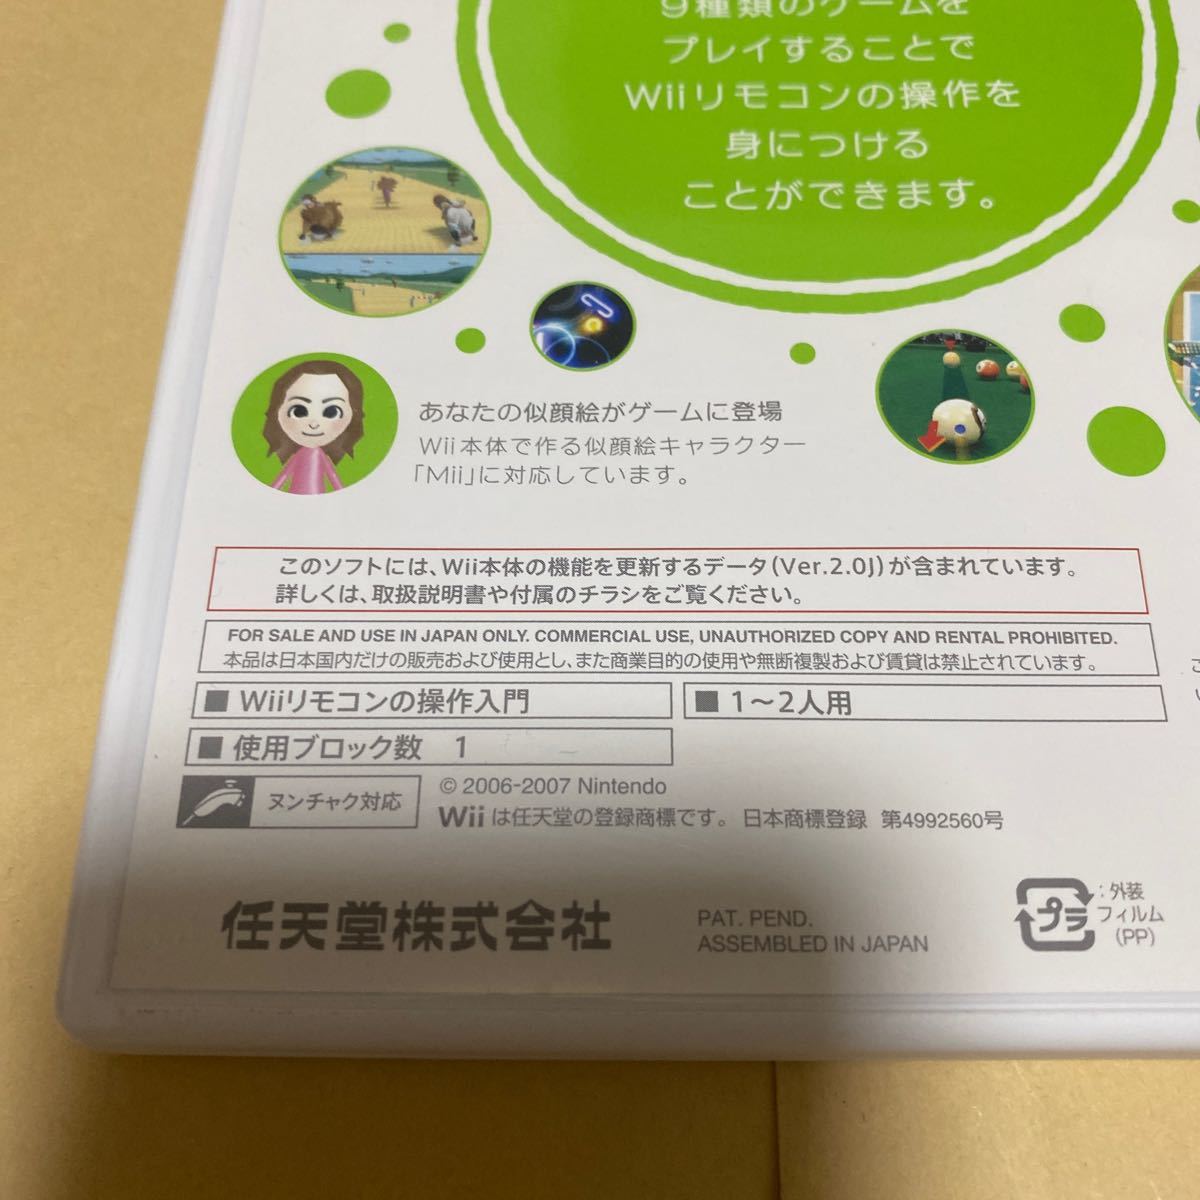 WiiスポーツリゾートとはじめてのWii  Wii